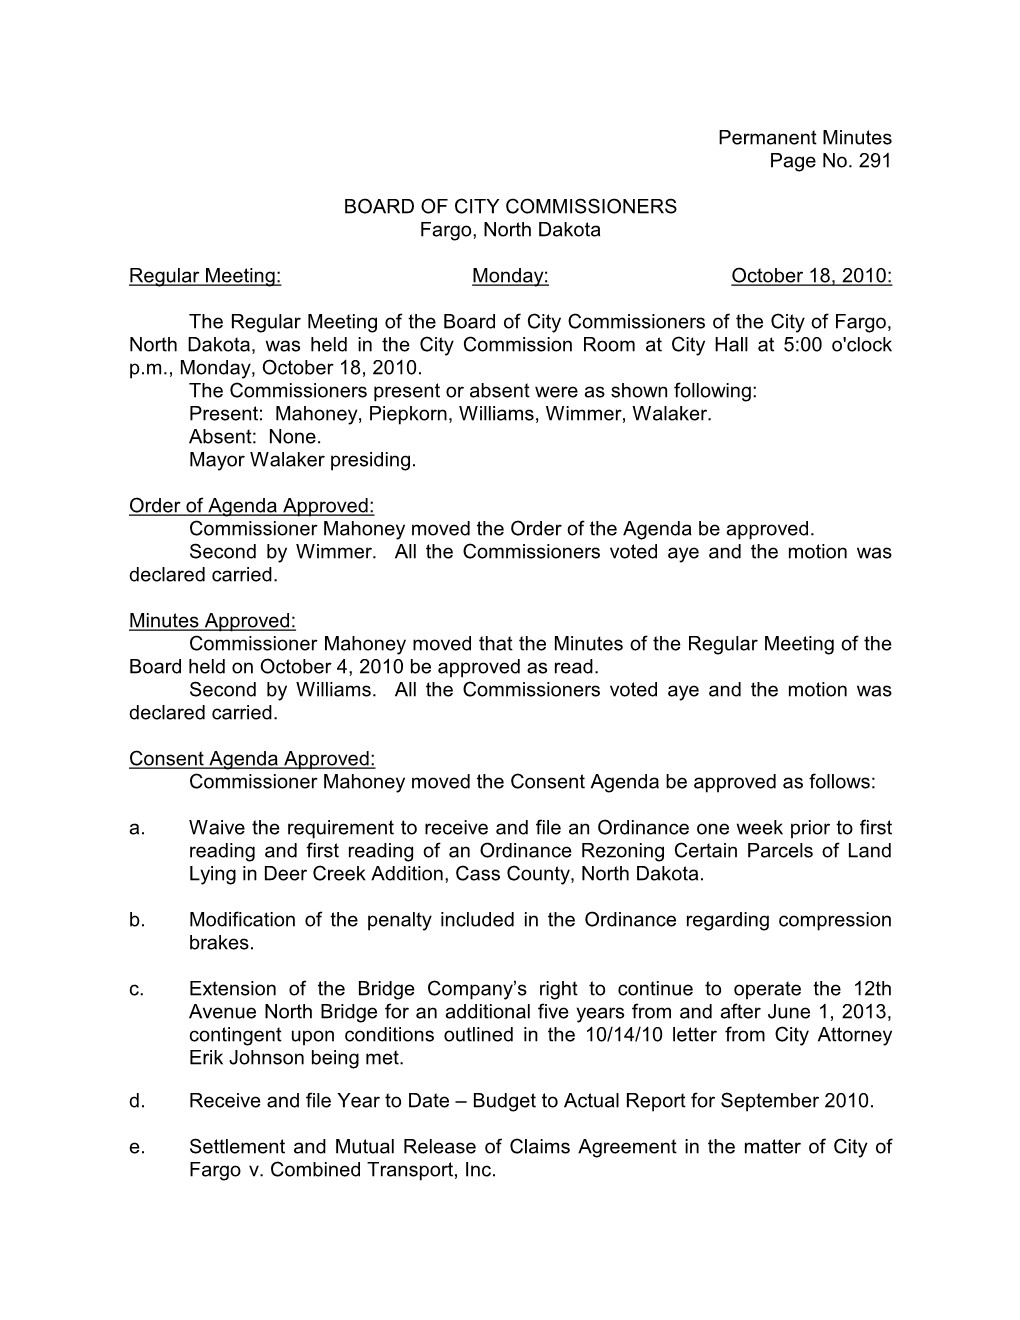 Permanent Minutes Page No. 291 BOARD of CITY